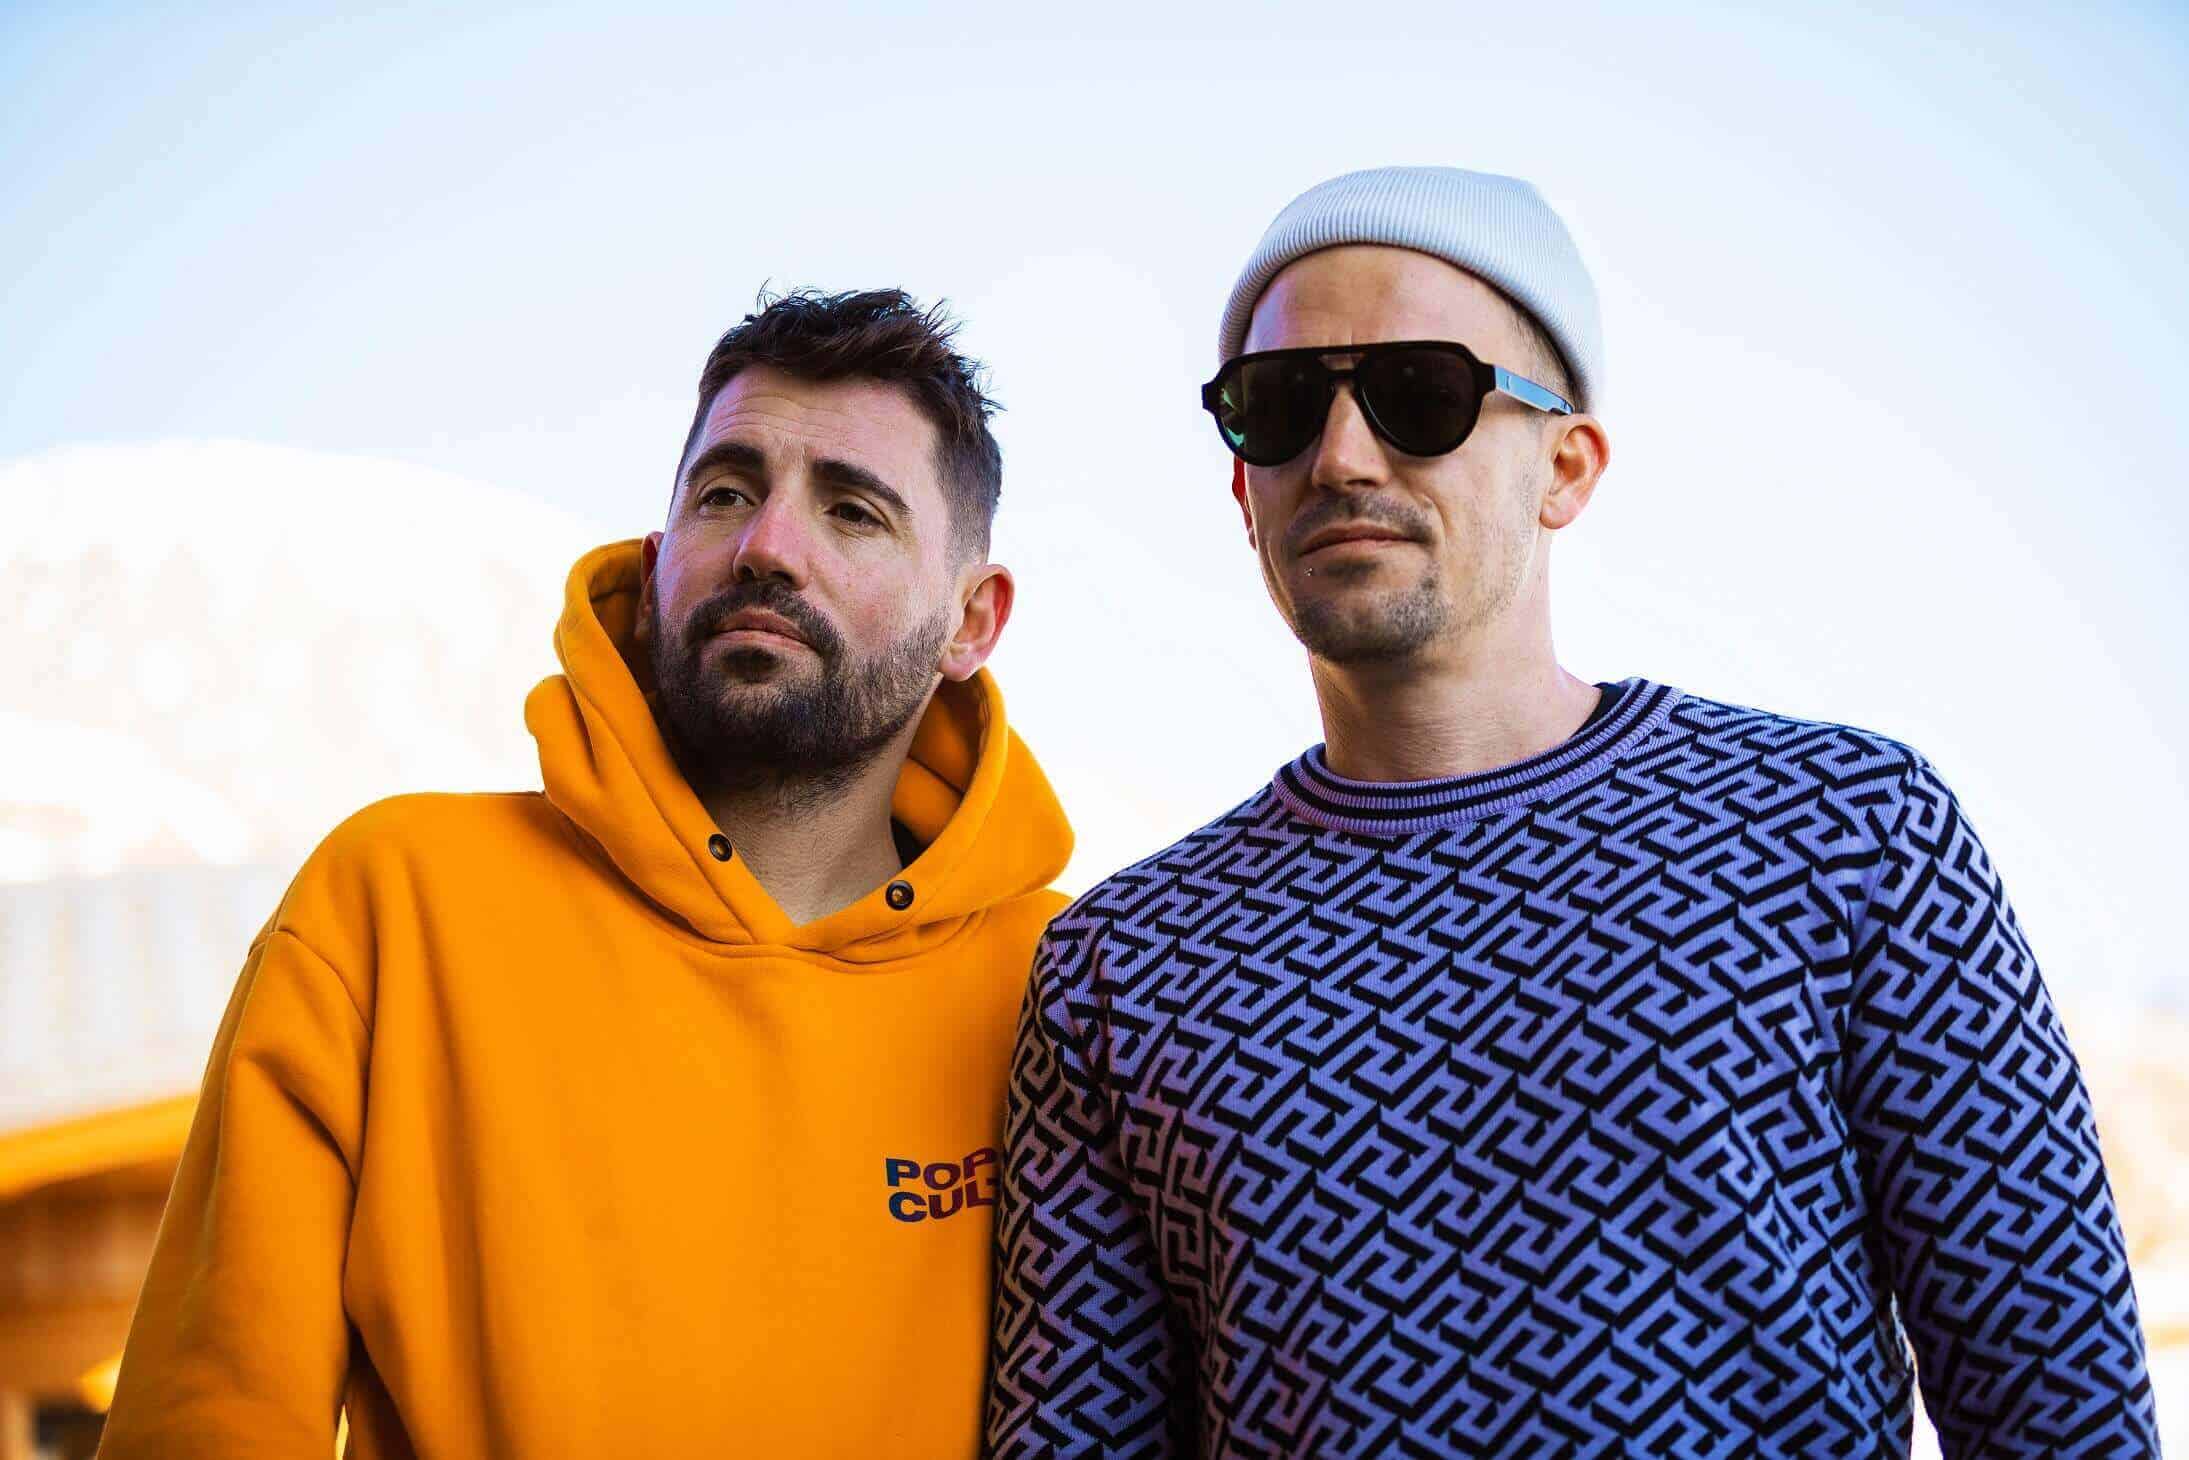 Dimitri Vegas & Like Mike & Vini Vici join forces for festival-ready collab ‘Get In Trouble’